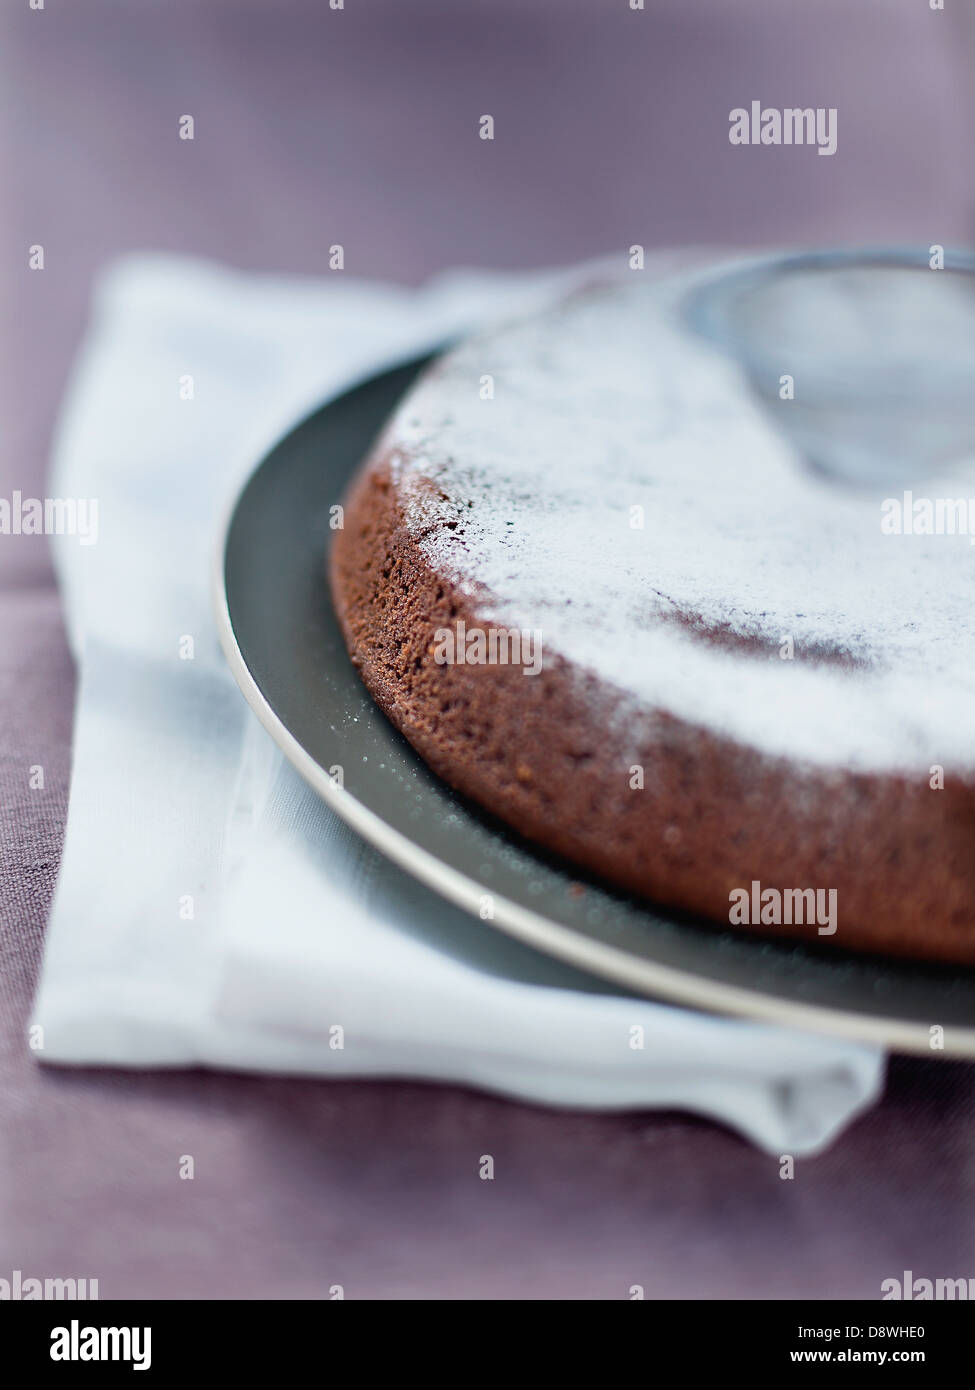 Le Sprinkiling flourless chocolate cake with icing sugar Banque D'Images